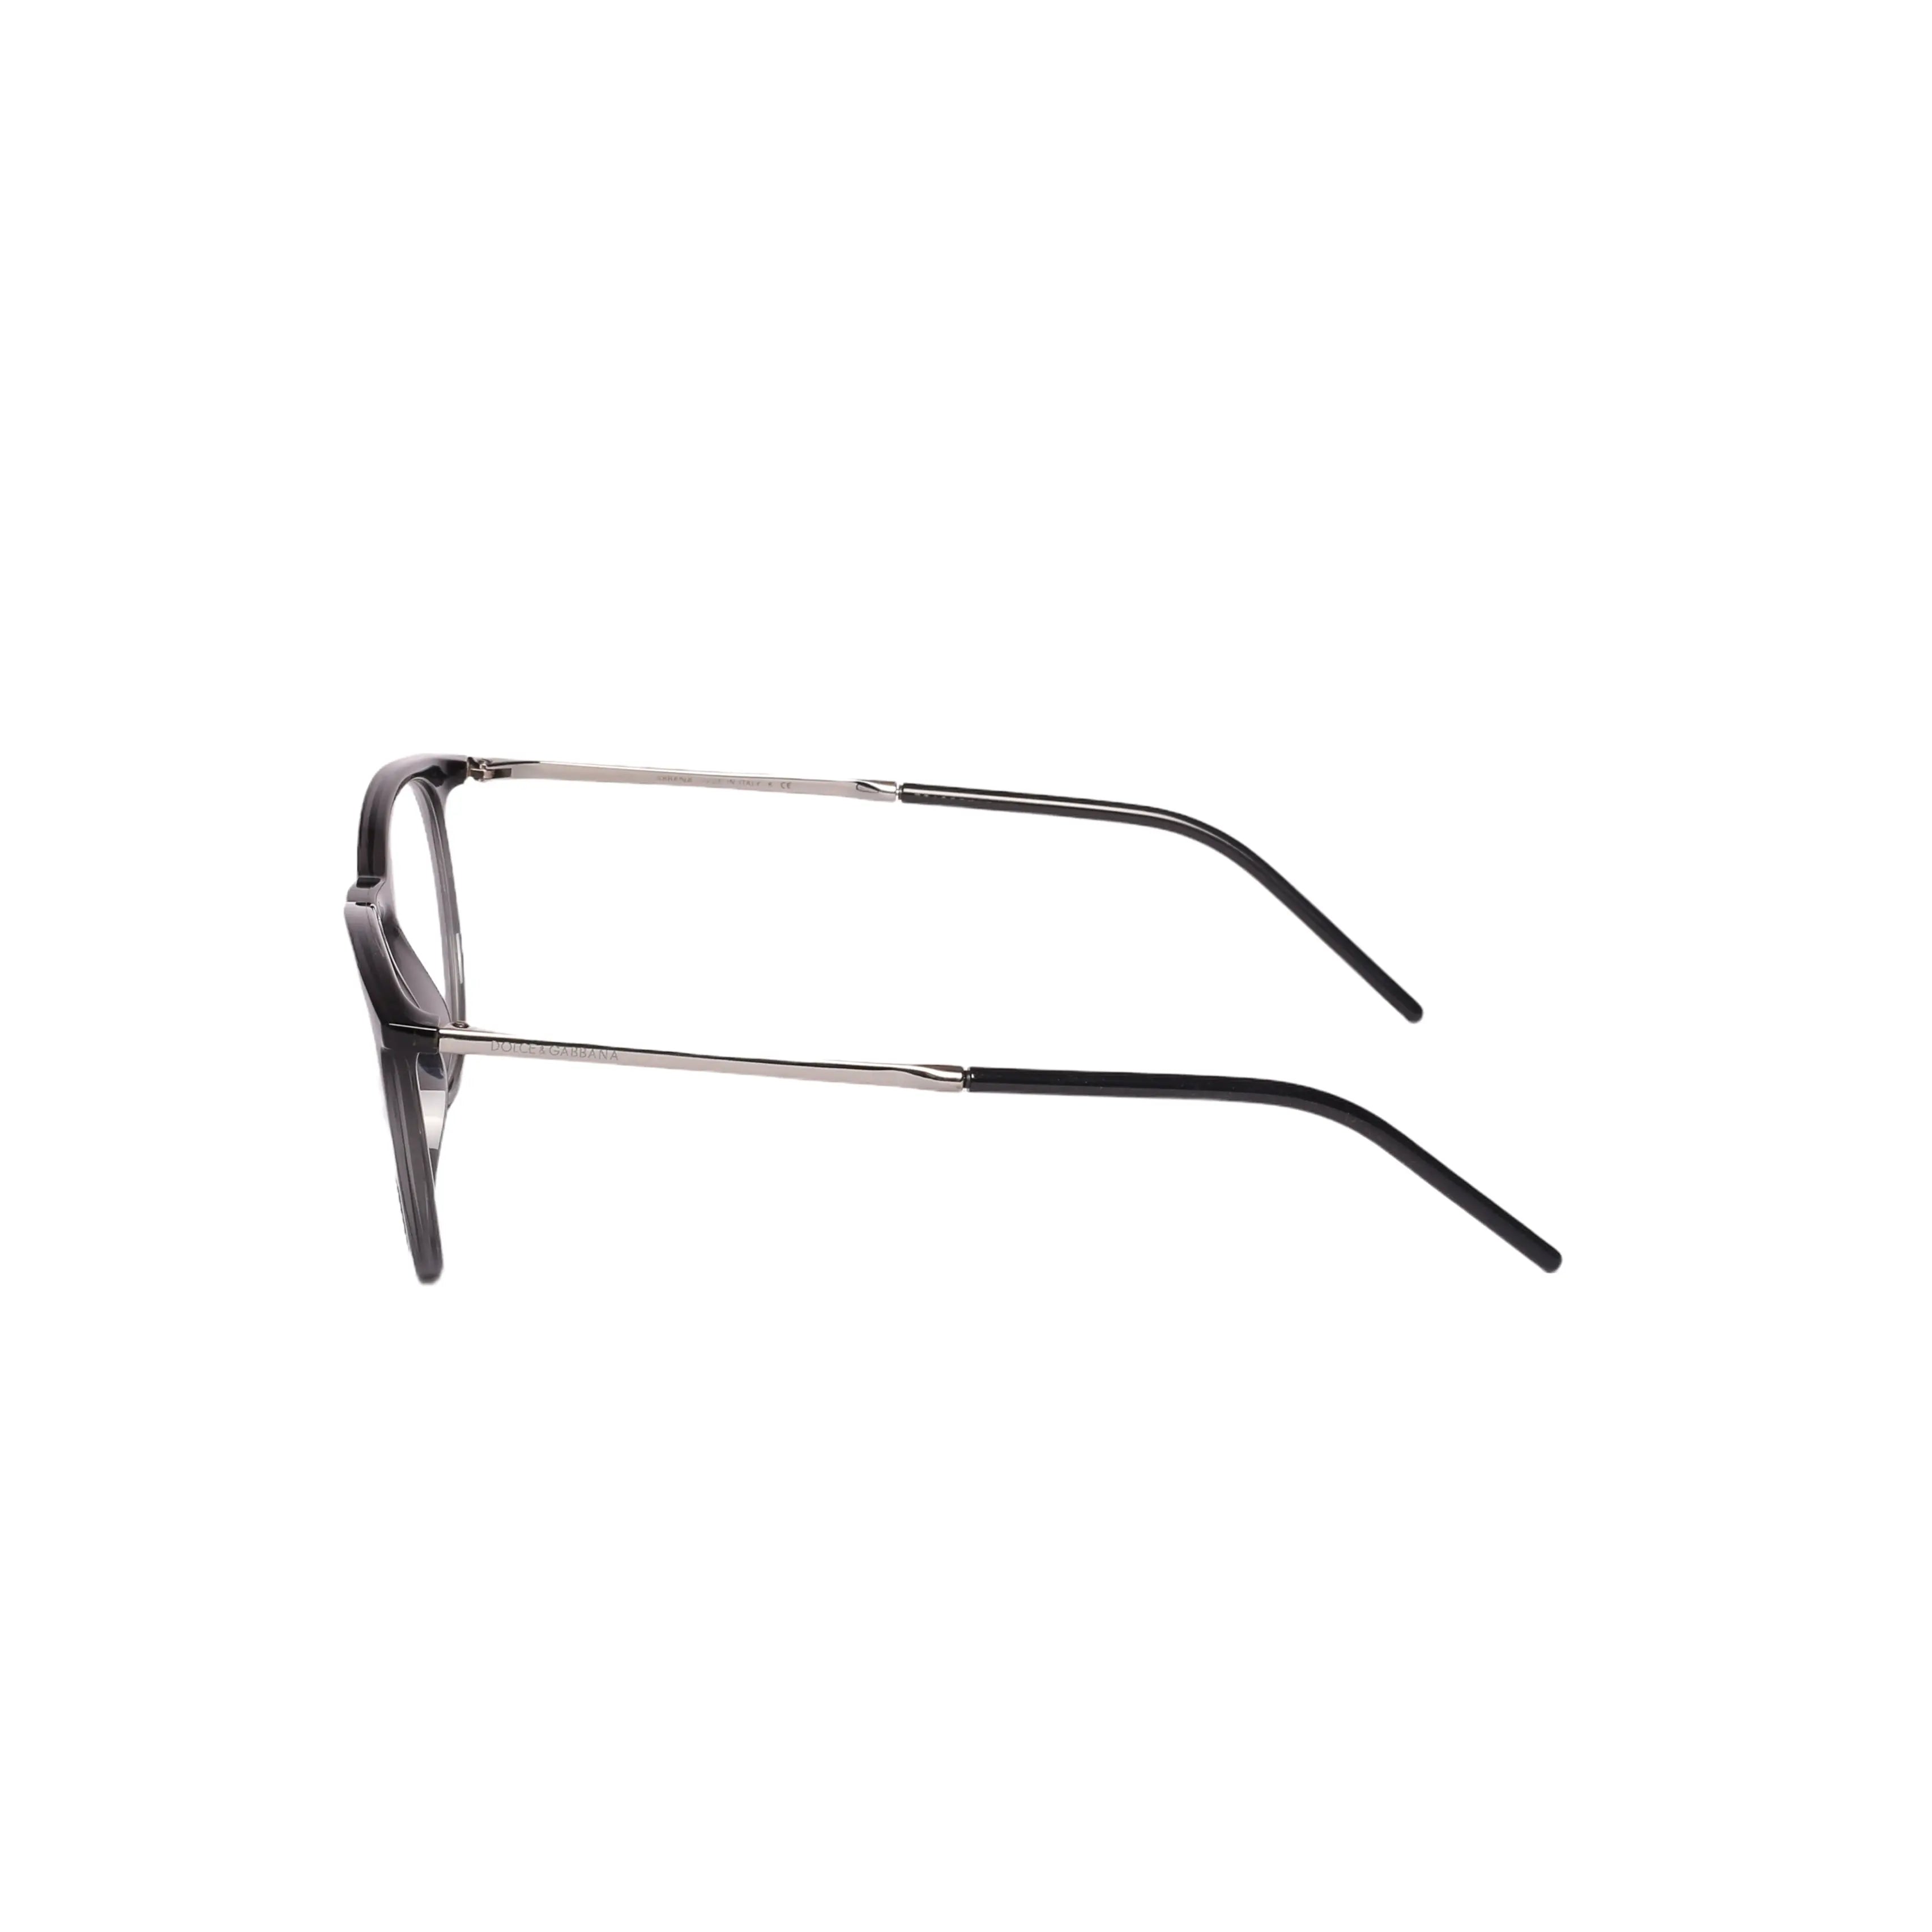 Dolce & Gabbana (D&G) DG 5074-50-3255 EyeglassesDolce &amp; Gabbana (D&amp;G) DG 5074-50-3255 Eyeglasses are the perfect combination of style and elegance. Featuring a sleek modern frame and classic color palette,Eyeglasses